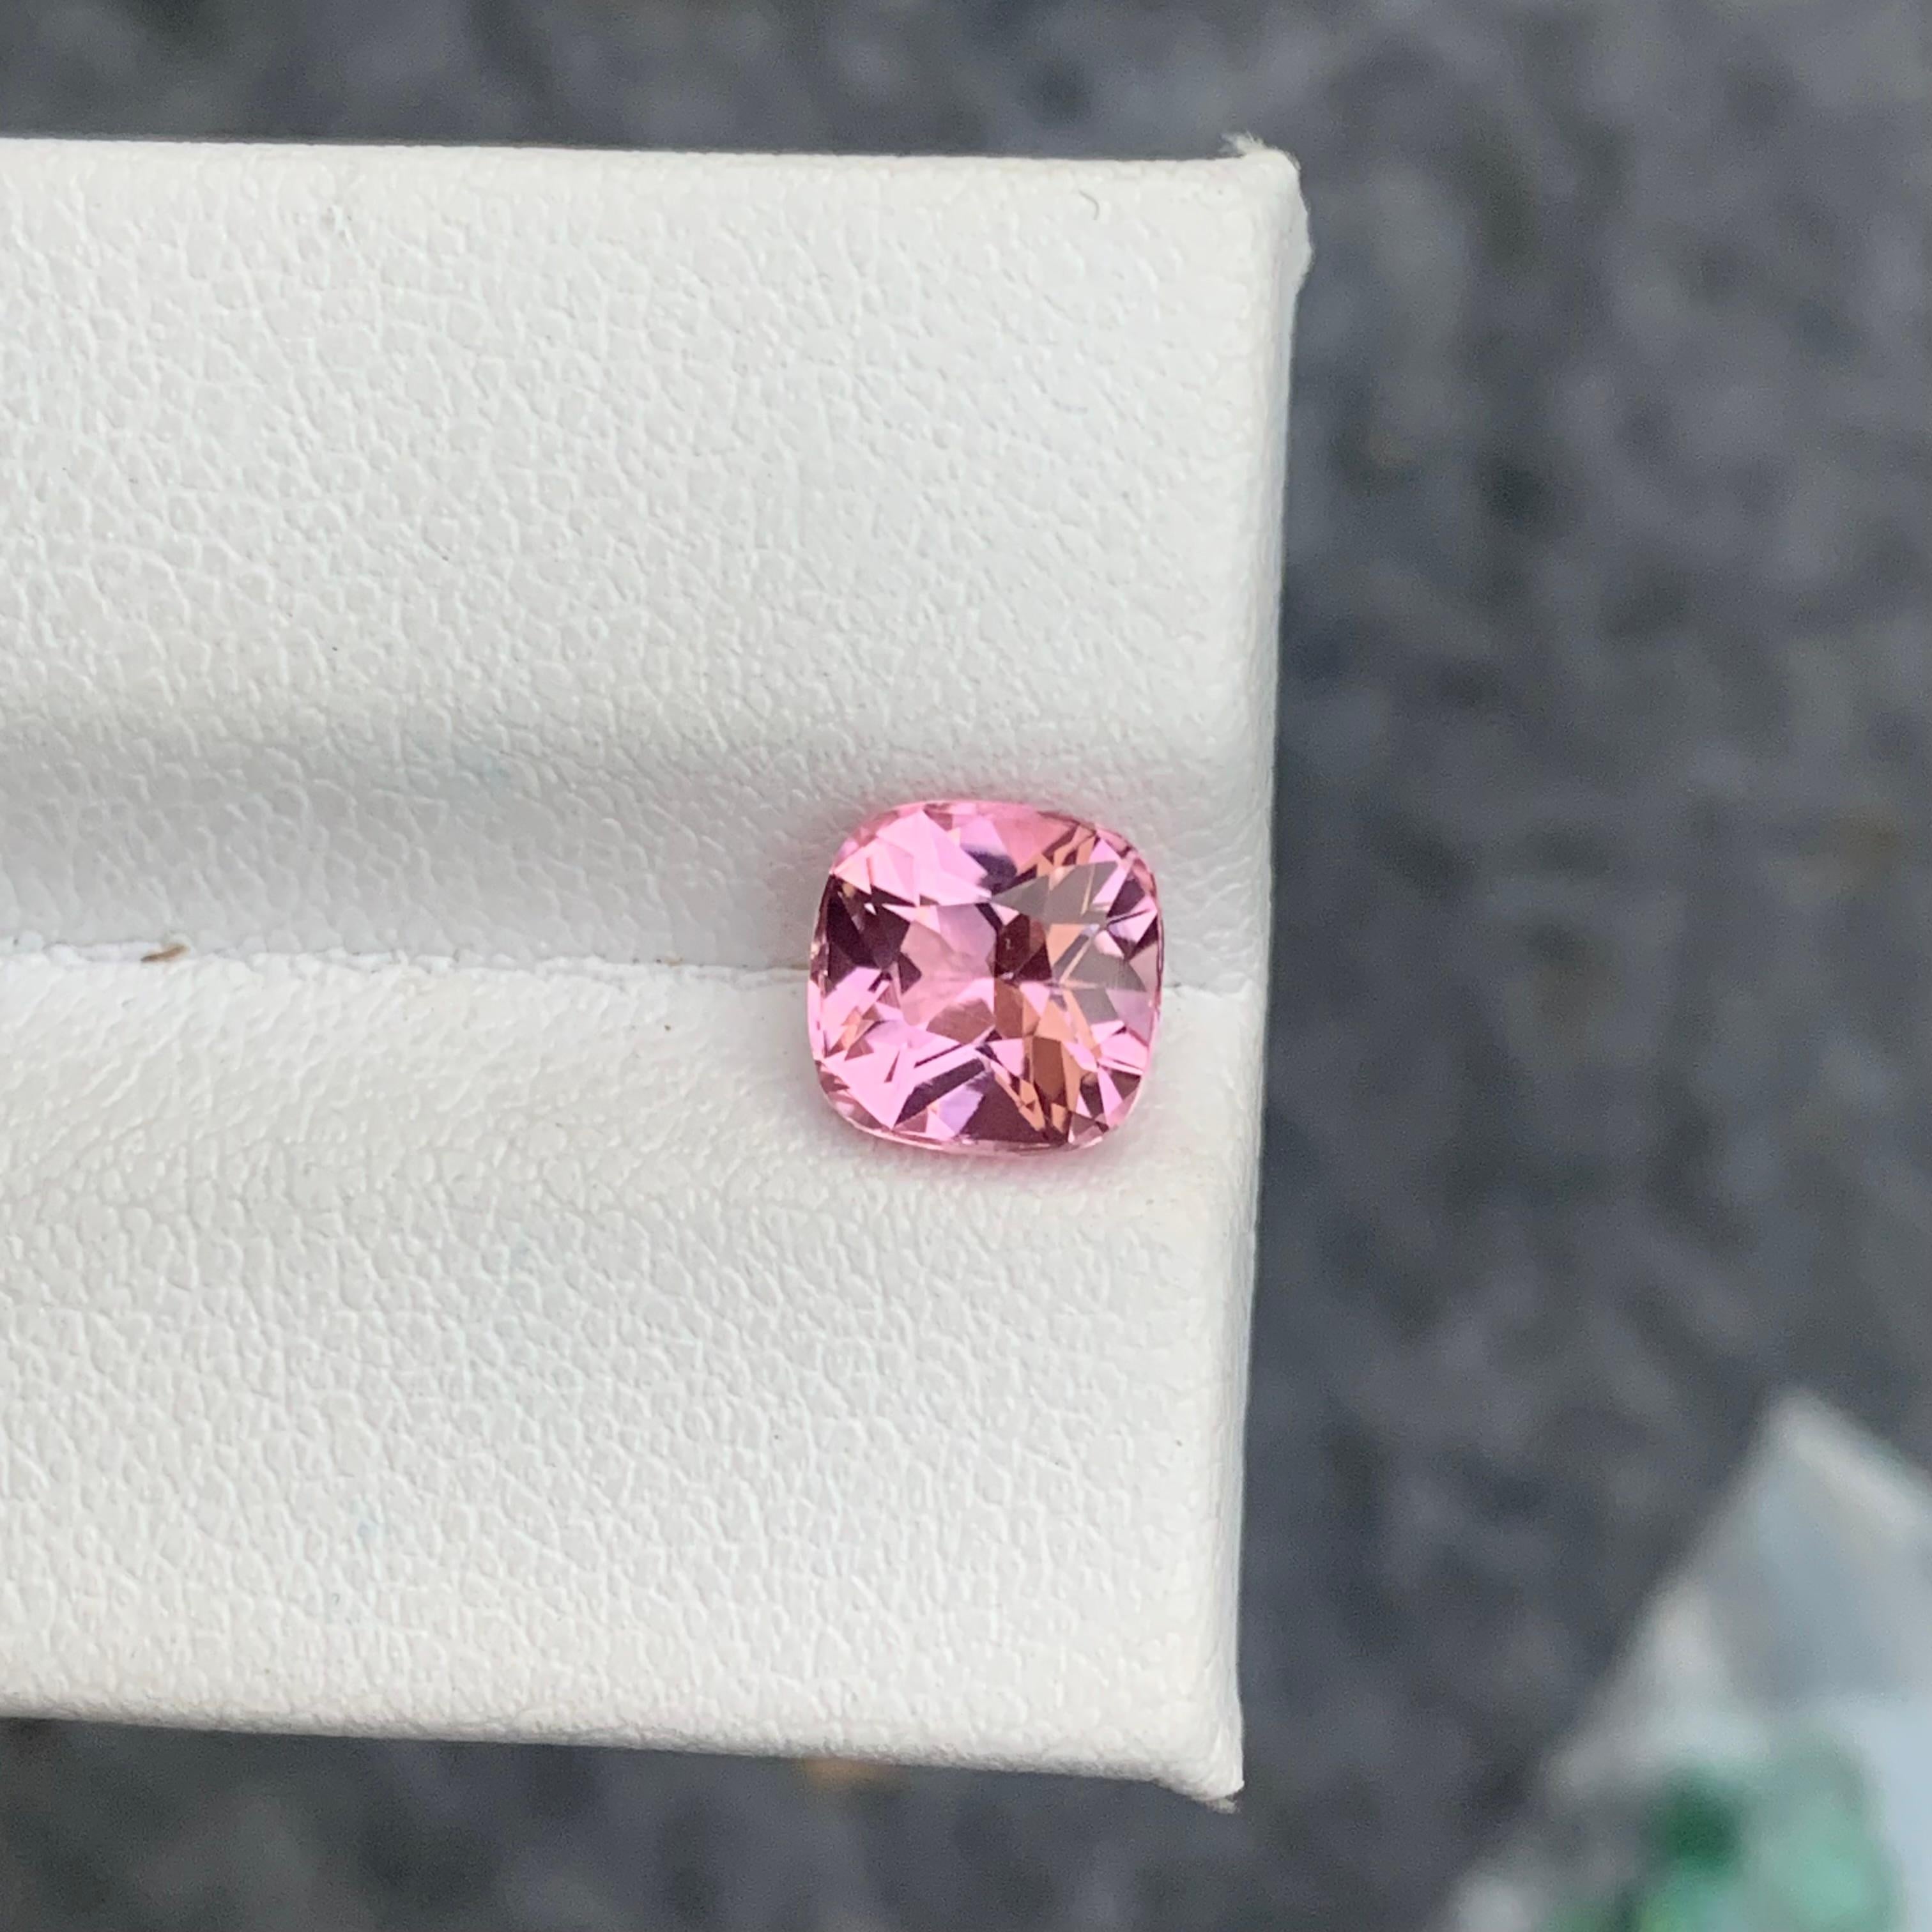 Exceptional 2.0 Carat Natural Loose Baby Pink Tourmaline from Afghan Mine 2